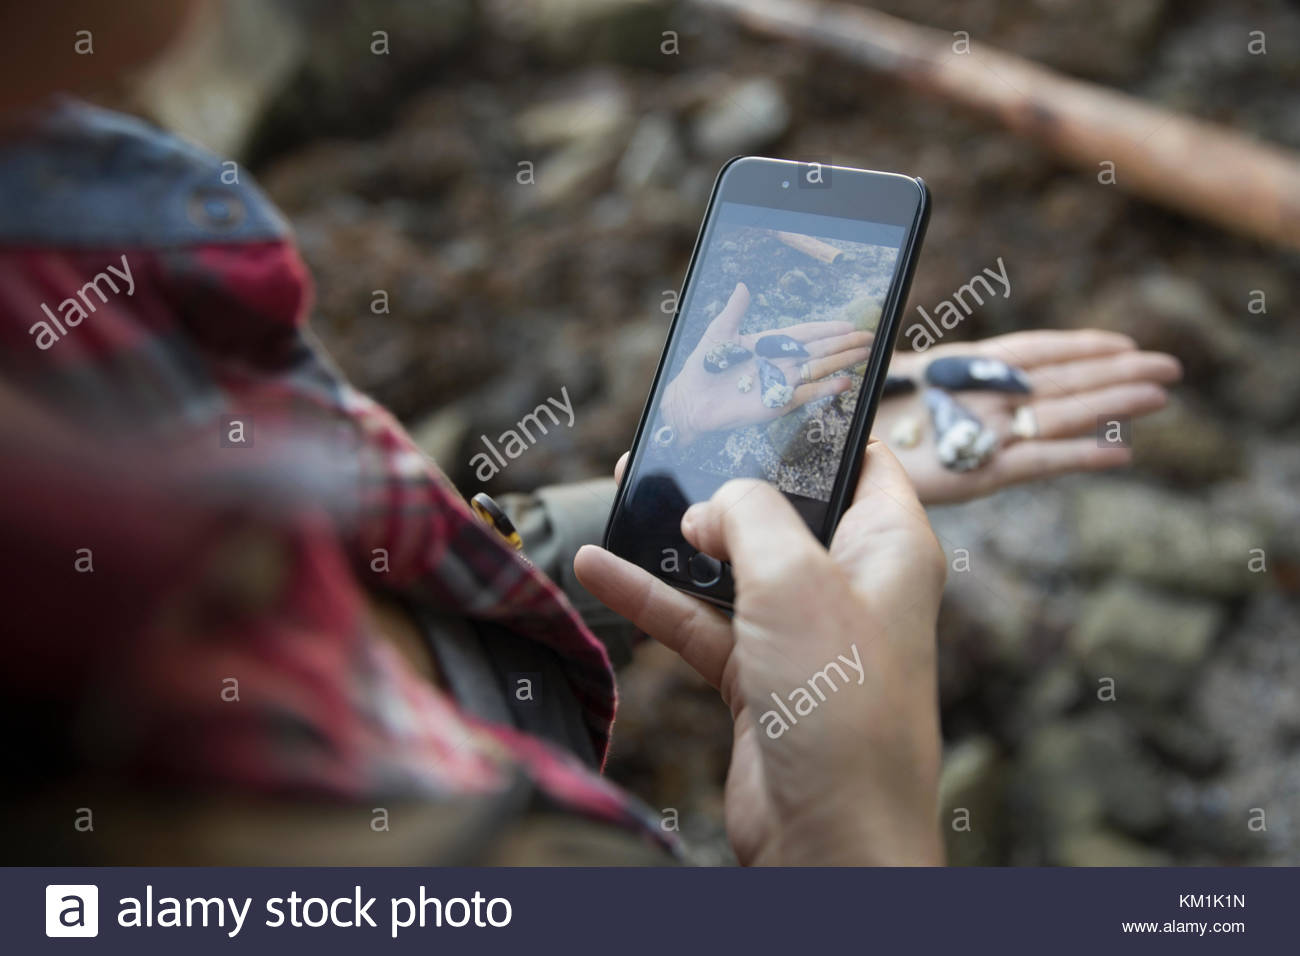 Woman with camera phone photographing stones Stock Photo